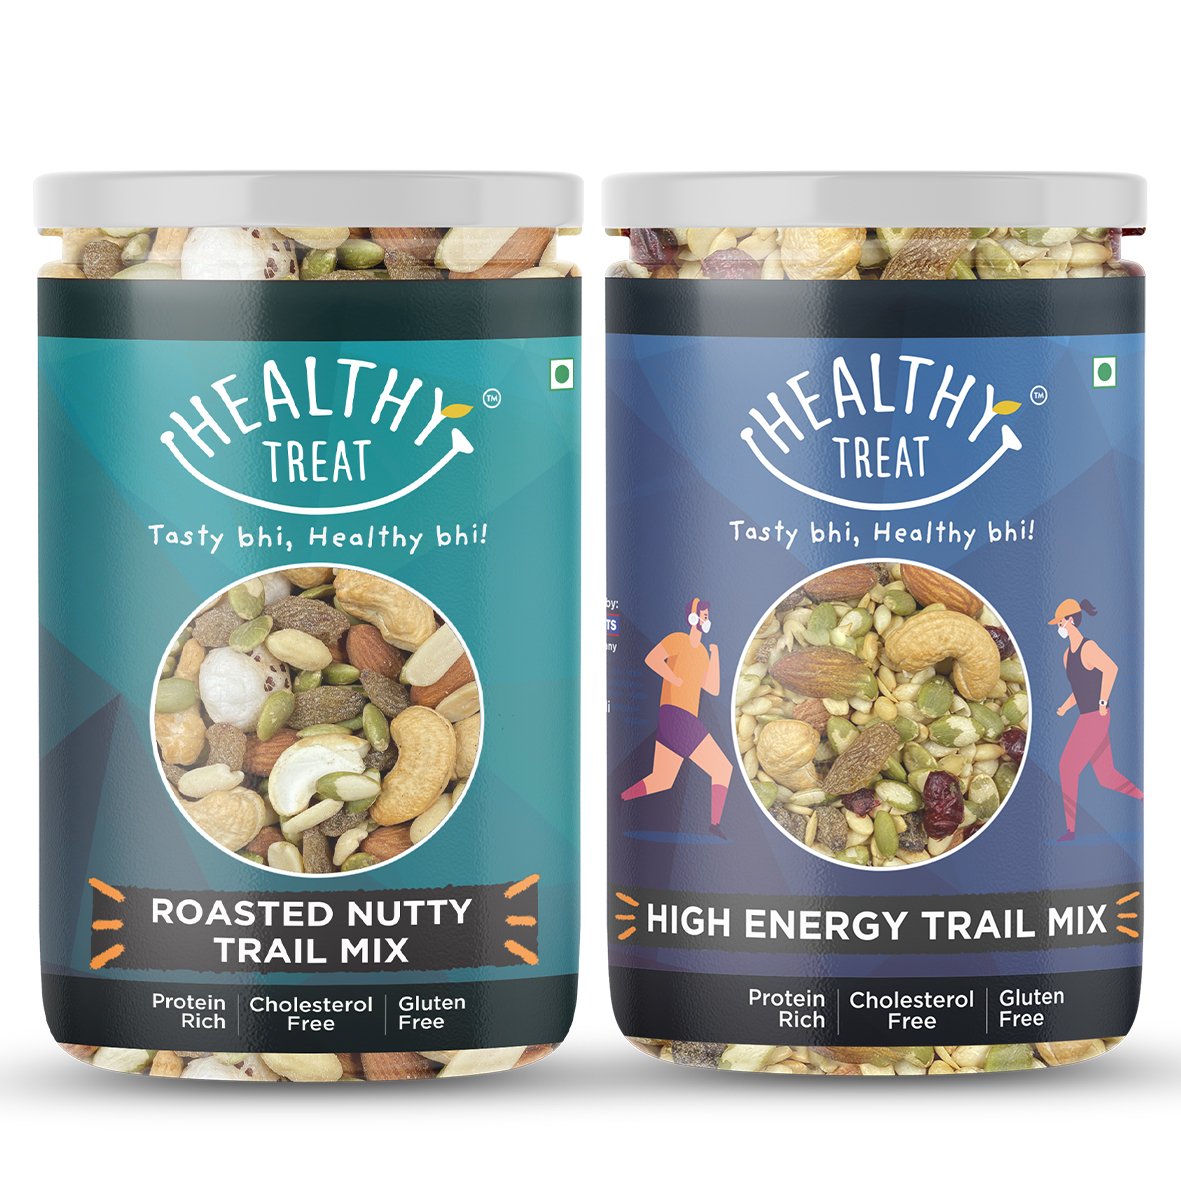 Roasted Nutty Trail Mix and High Energy Trail Mix Combo.